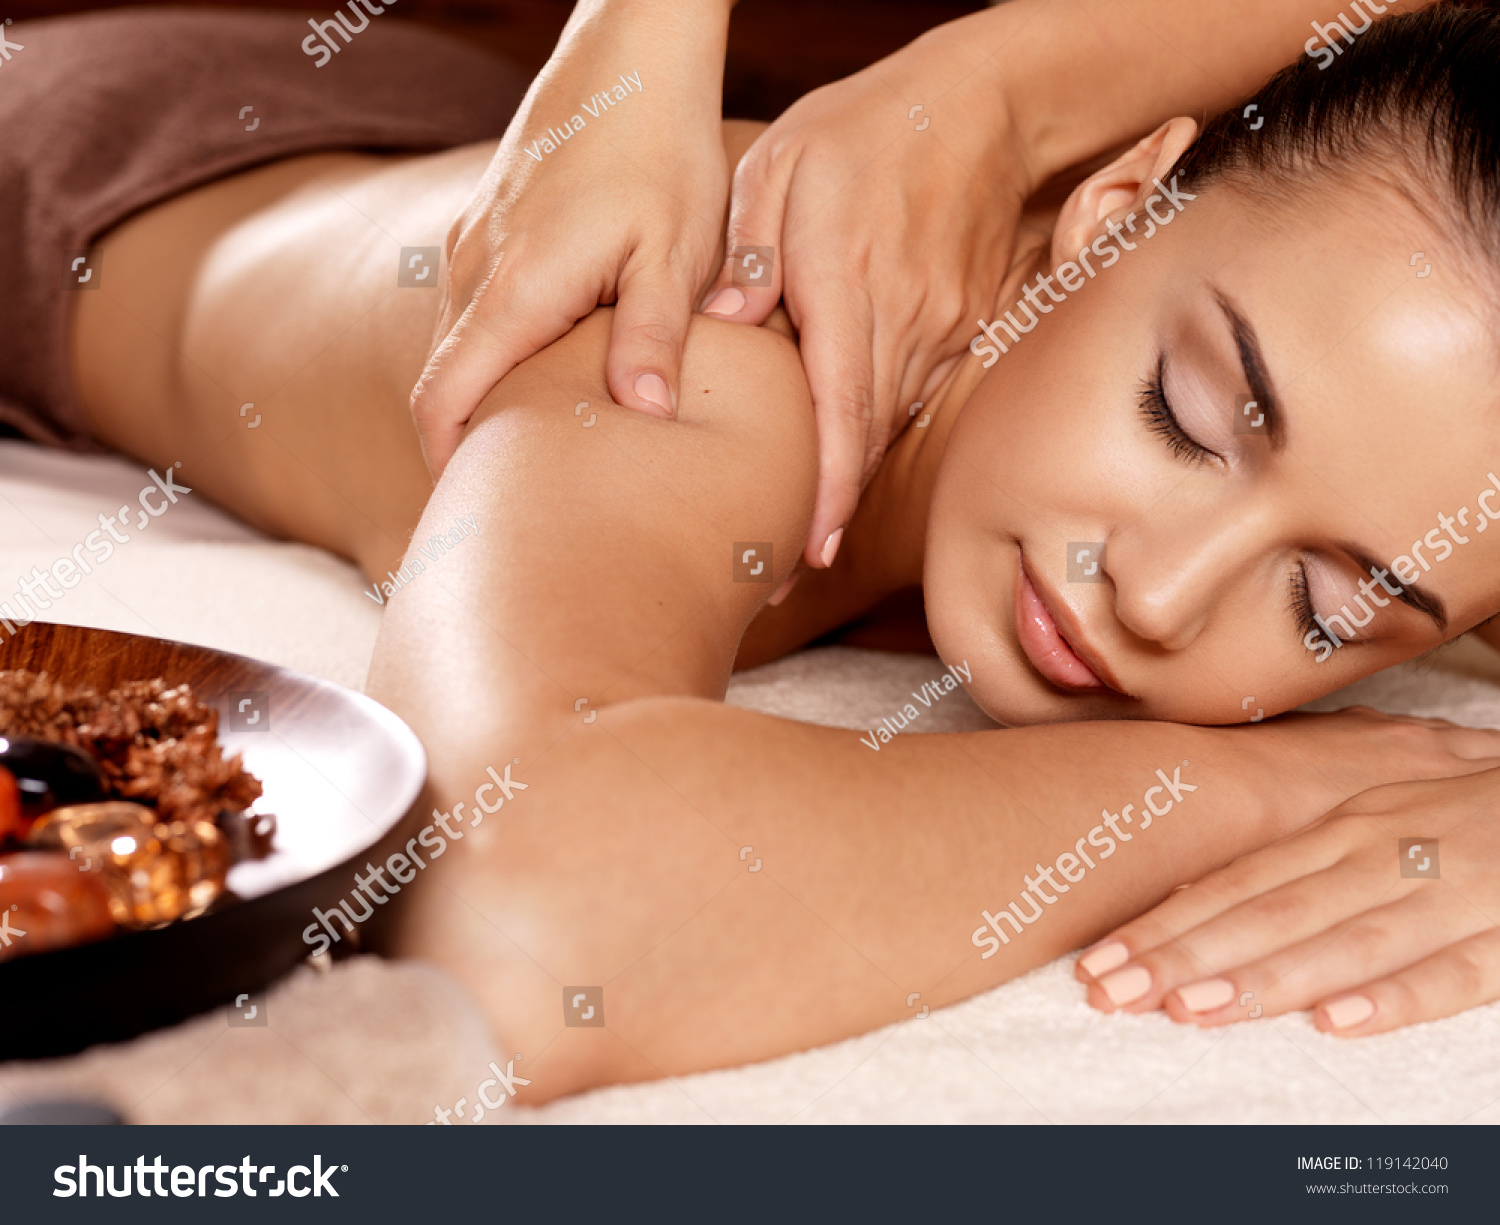 Masseur doing massage on woman body in the spa salon. Beauty treatment concept. #119142040